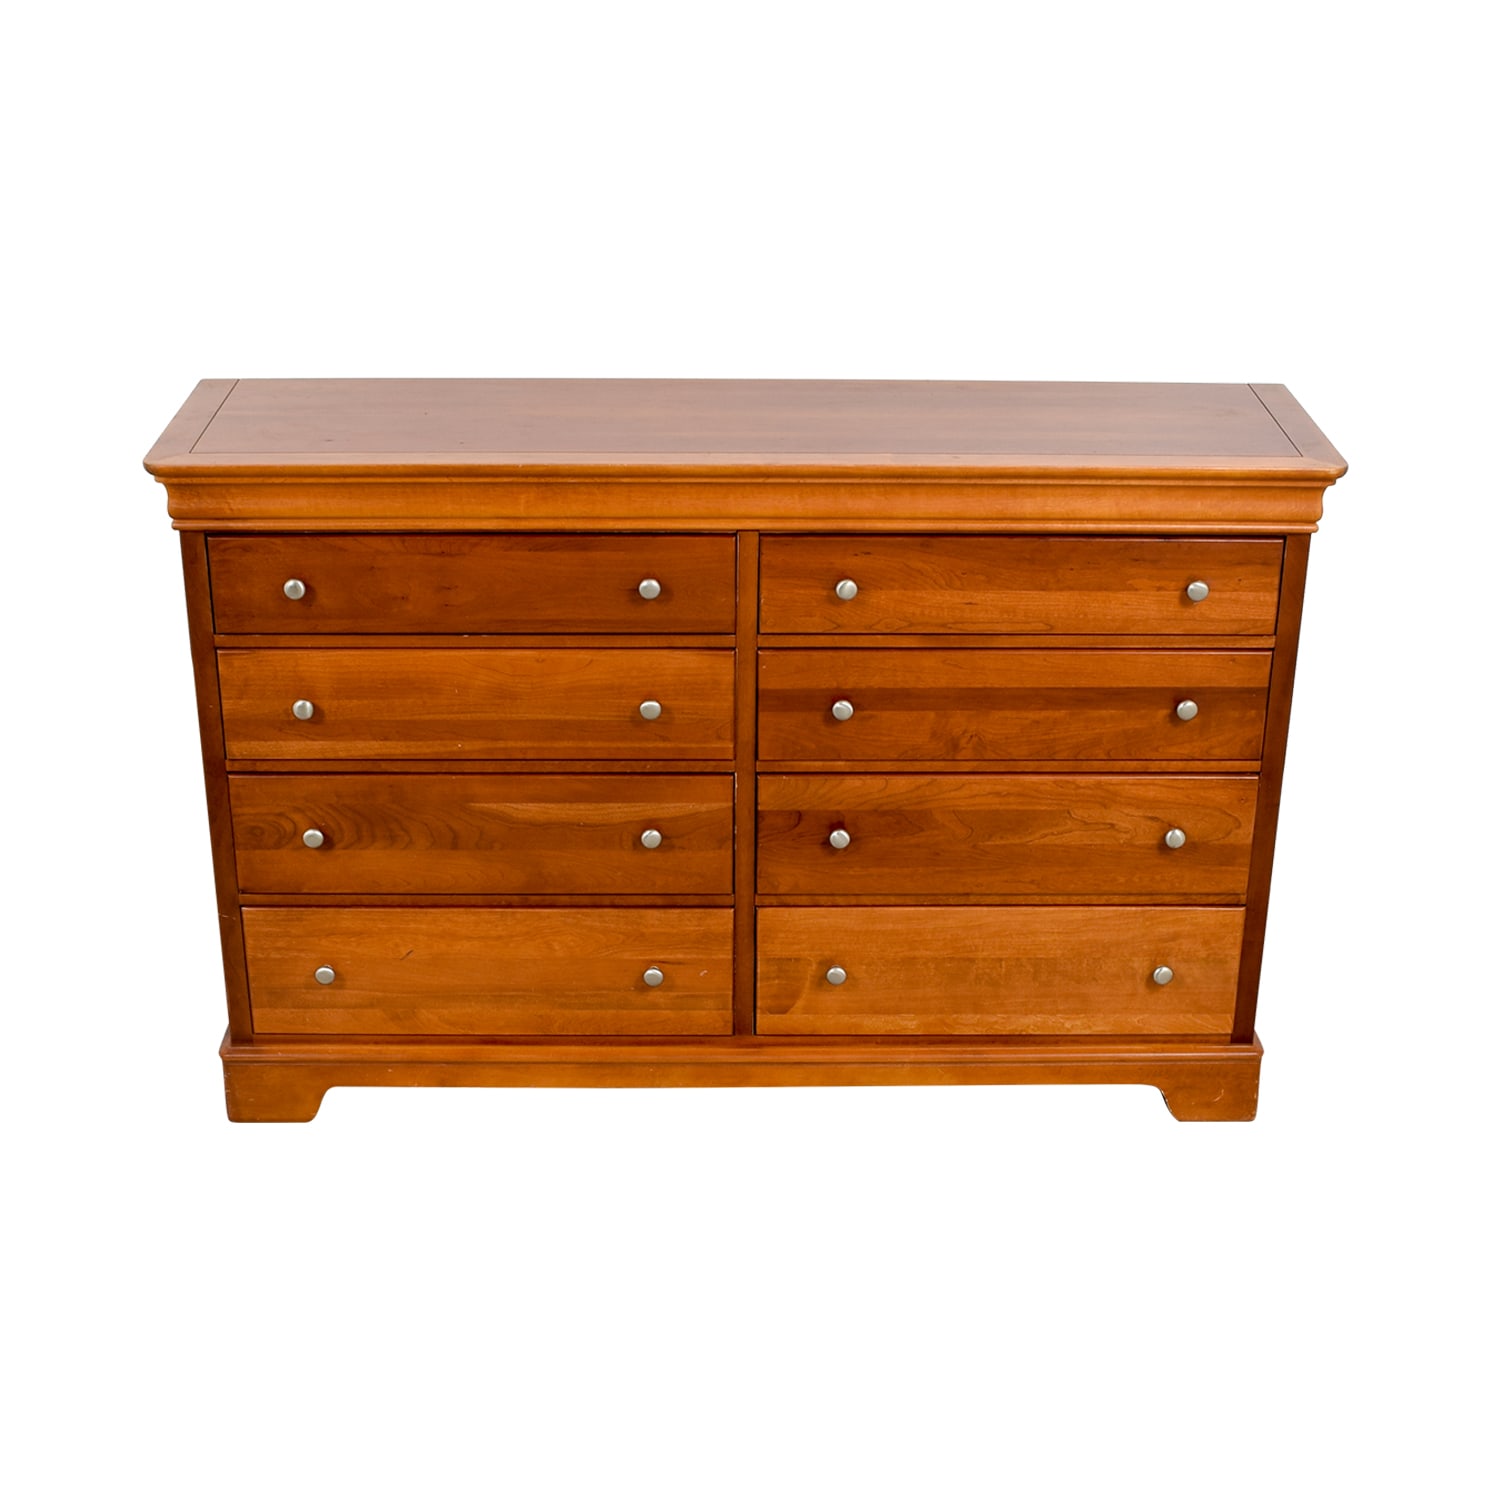 https://res.cloudinary.com/dkqtxtobb/image/upload/f_auto,q_auto:best,w_1500/product-assets/27764/stanley-furniture-company/storage/dressers/stanley-furniture-company-eight-drawer-dresser-used.jpeg